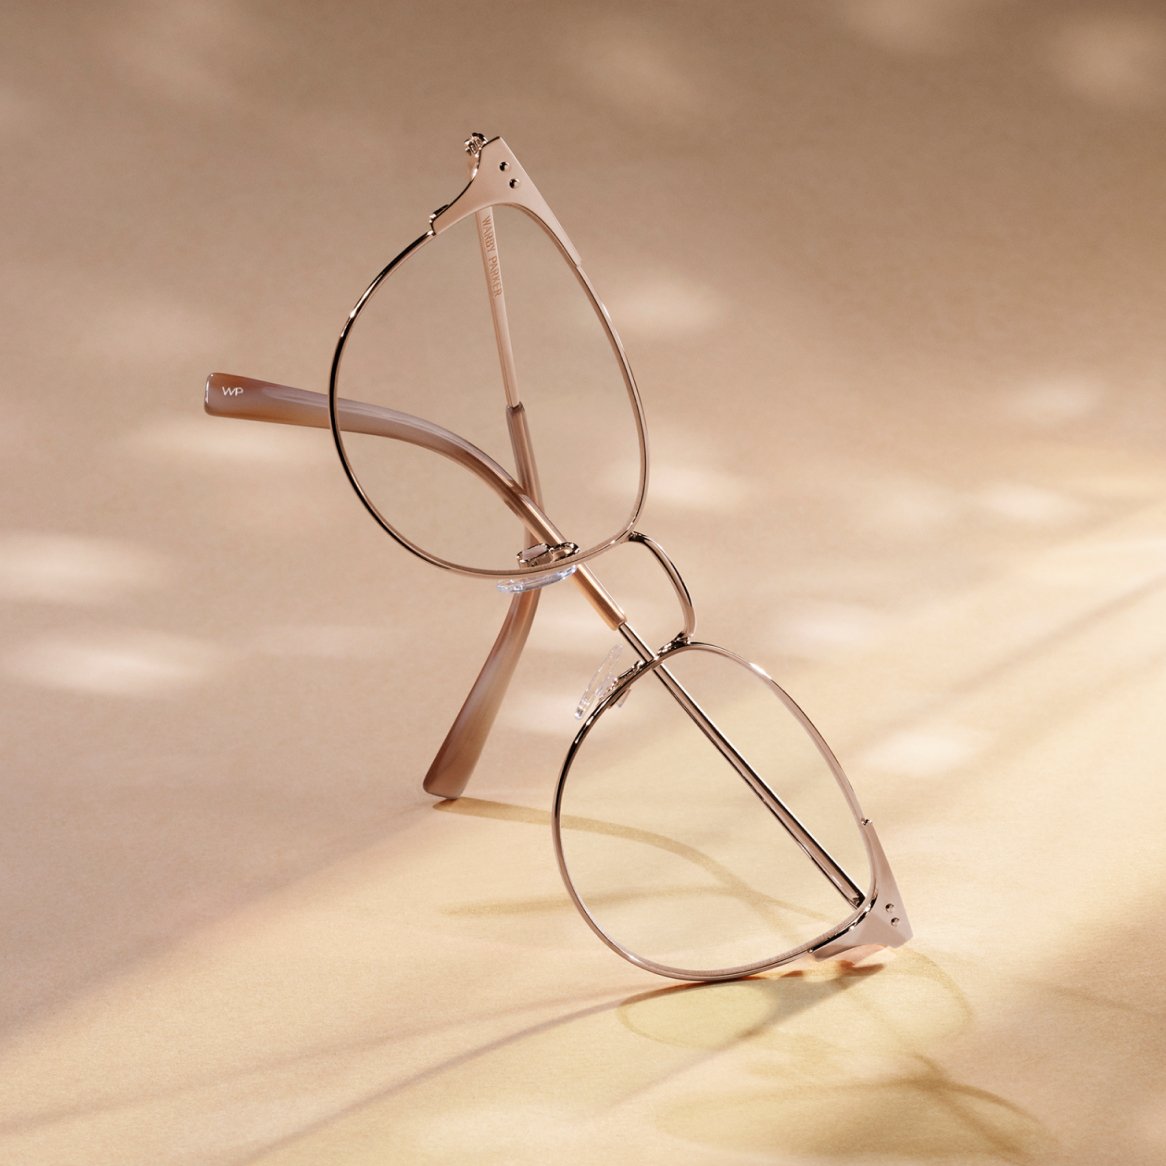 Close-up of a pair of glasses